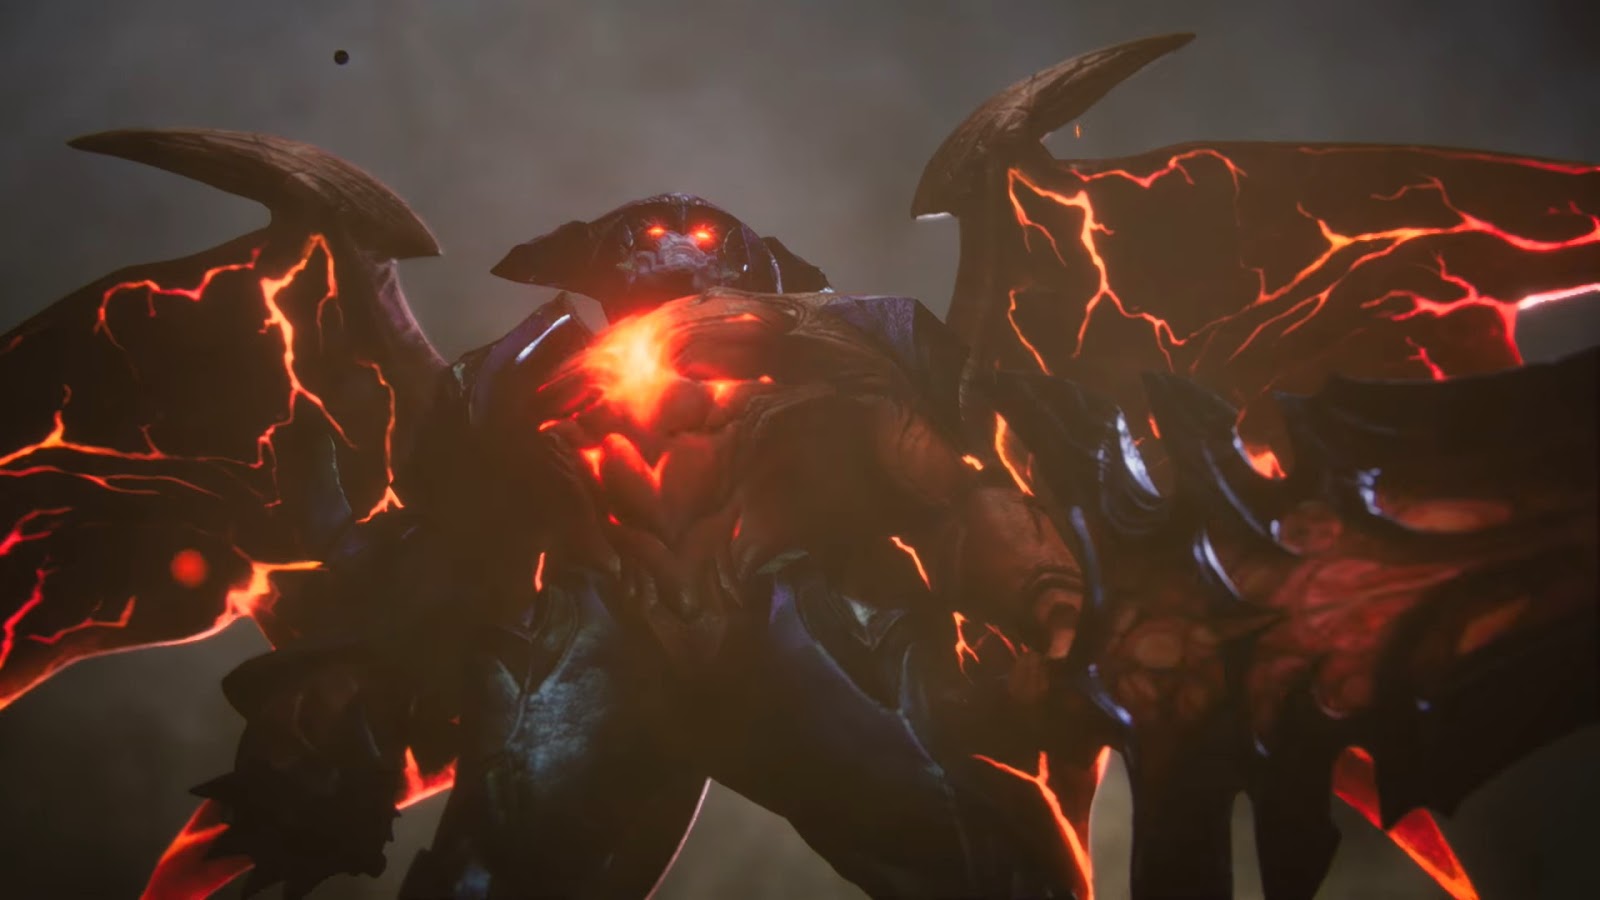 Aatrox the world ender from league of legends